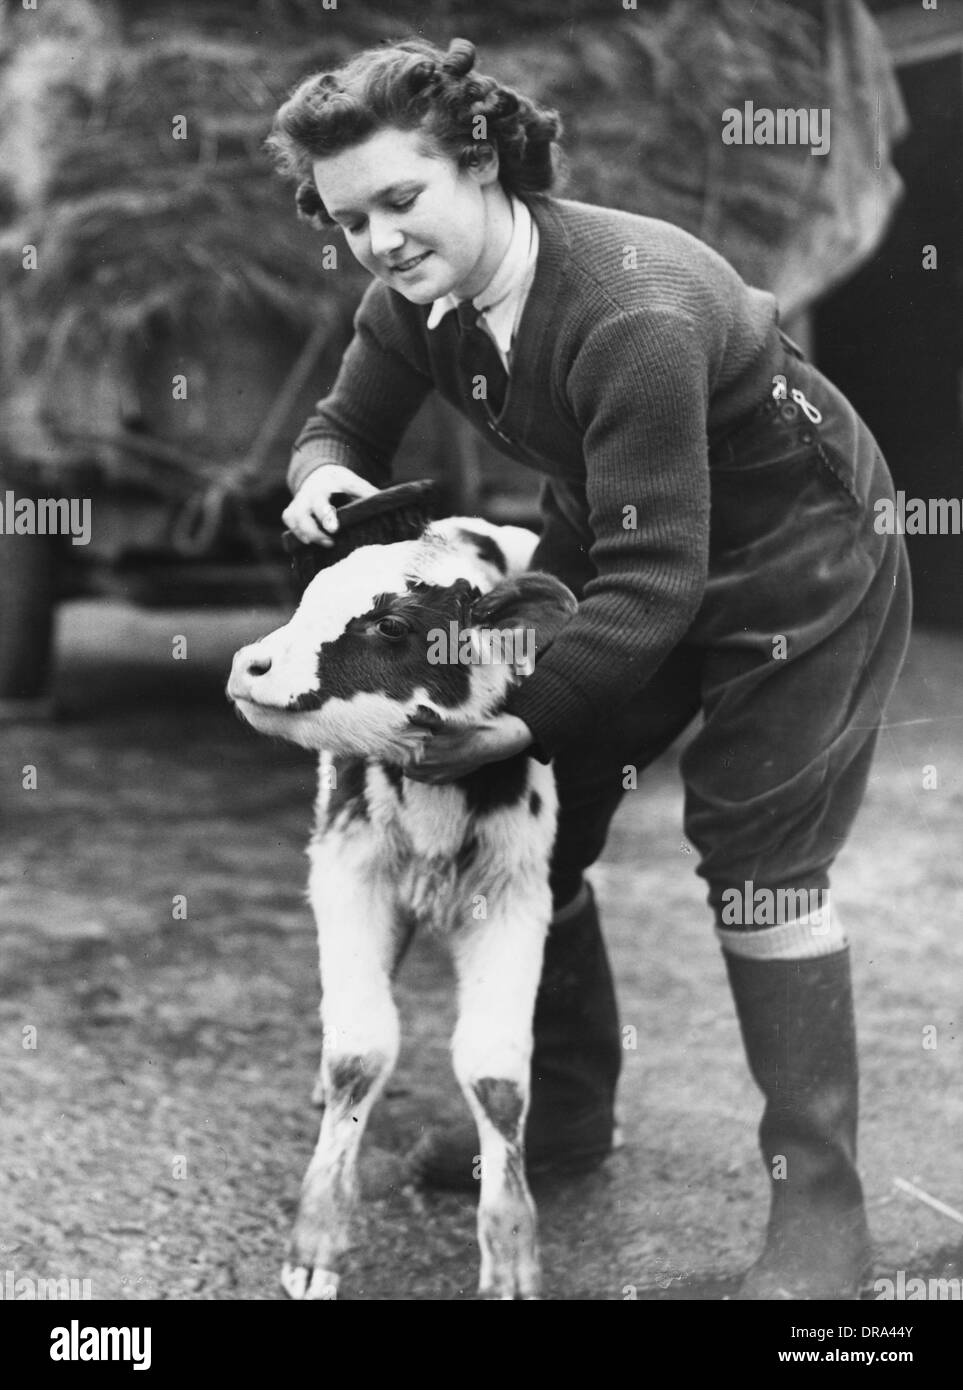 Land girls wwii Black and White Stock Photos & Images - Alamy